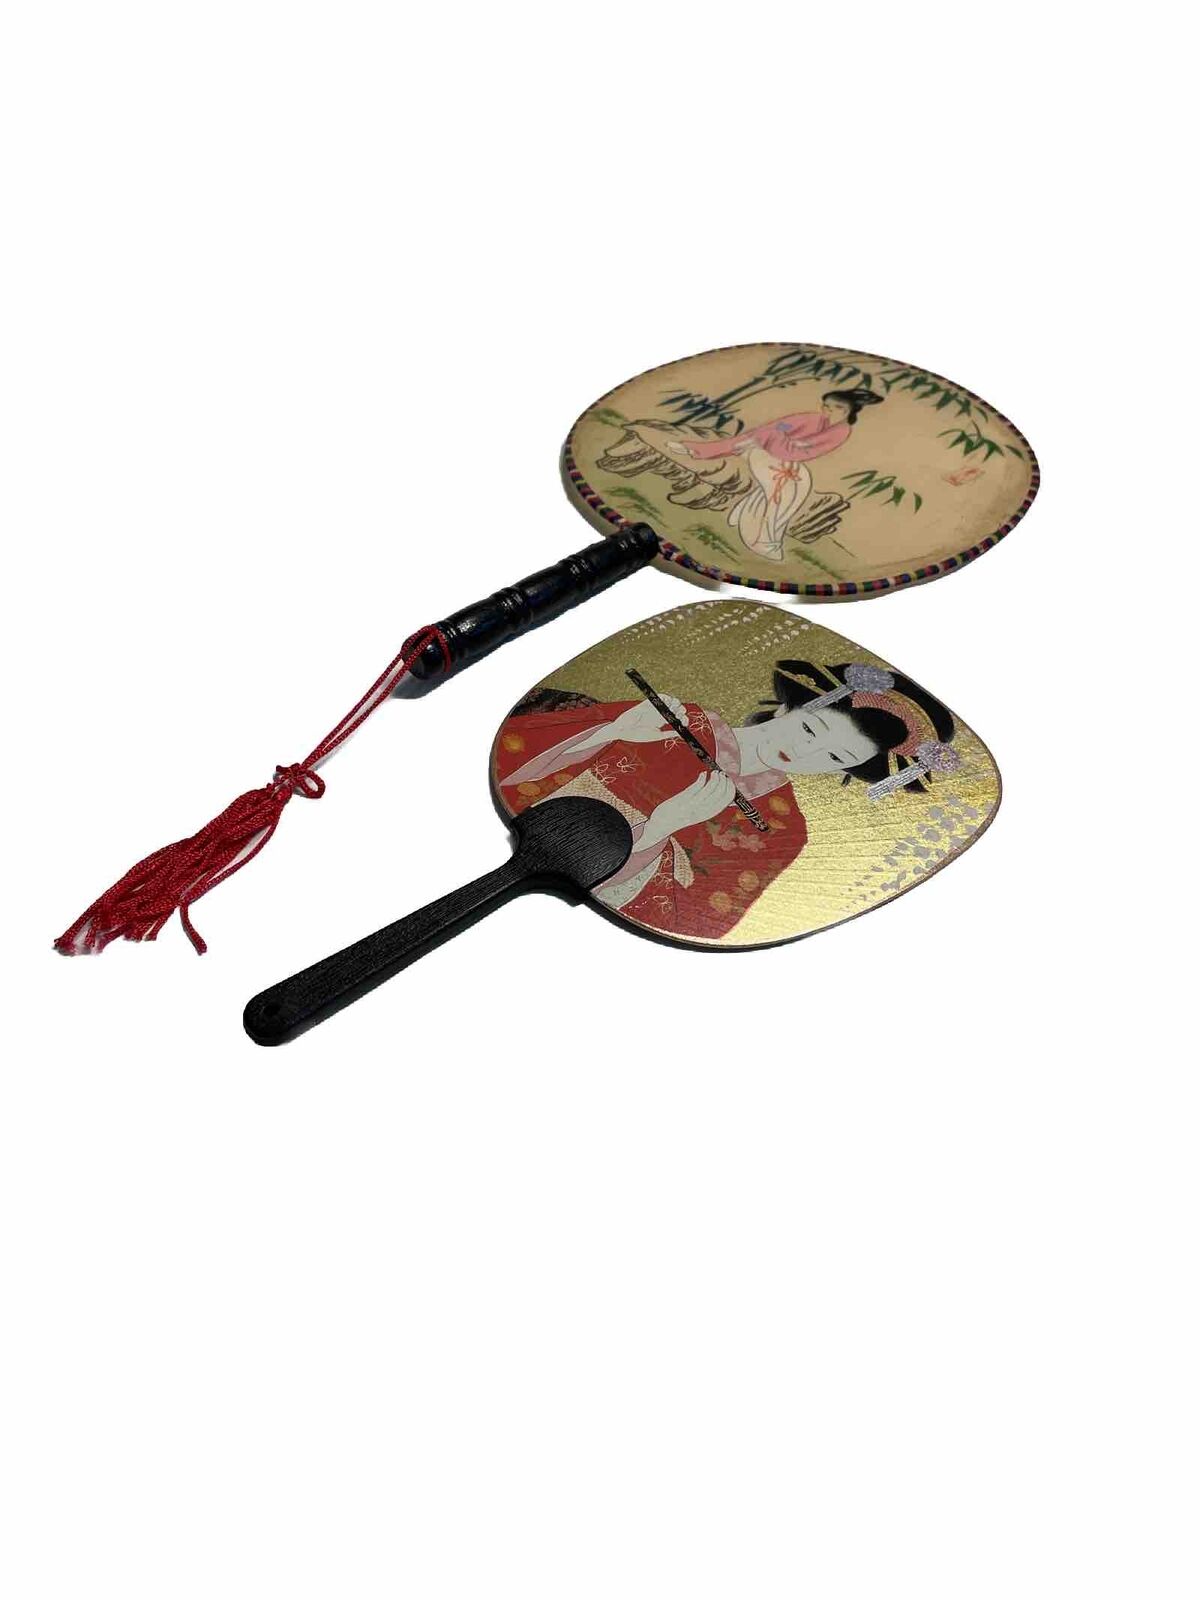 Vintage Chinese Hand Fan Silk, Bamboo Handle, Painted Paddle Fans-lot Of 2